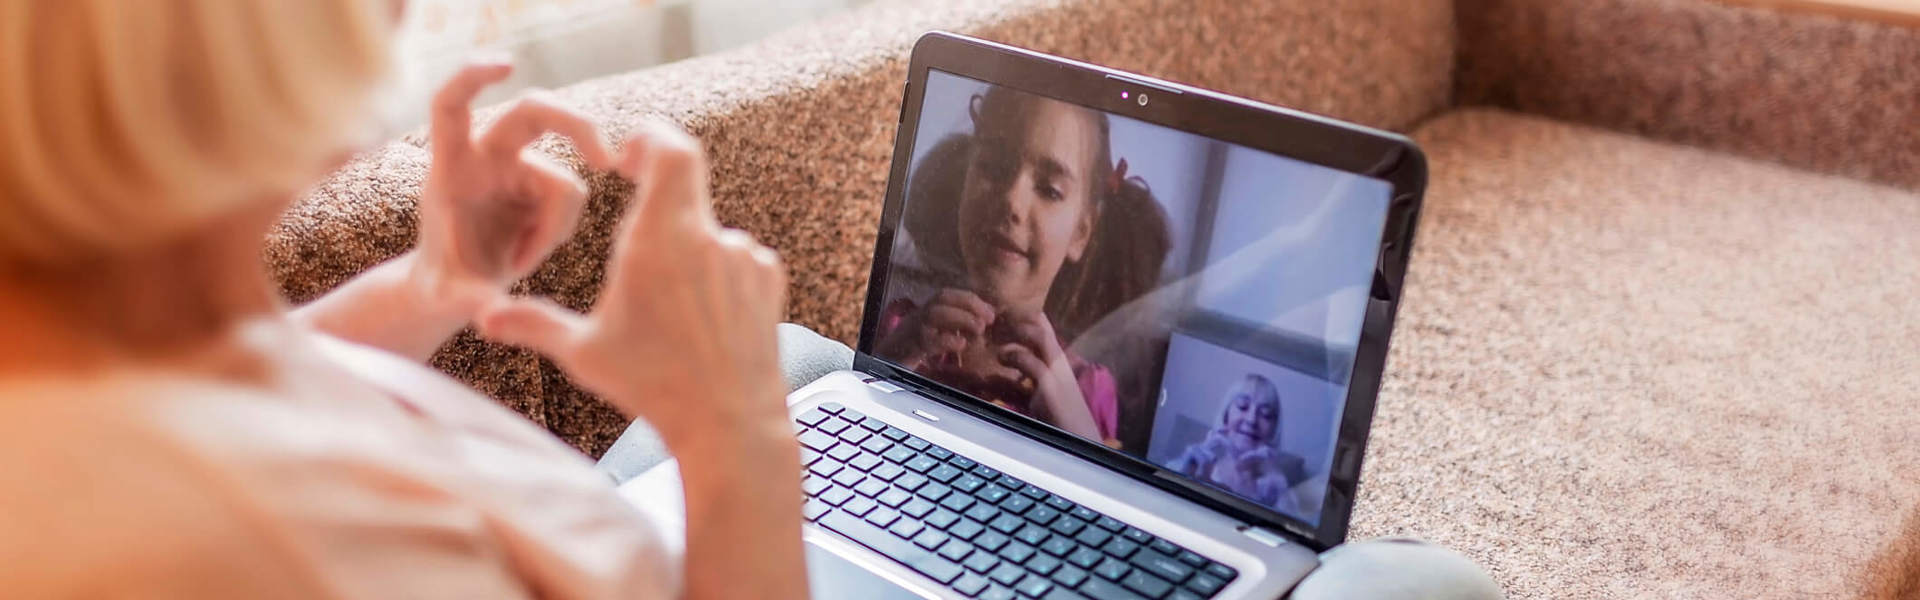 a grandmother facetiming with her granddaughter over a laptop